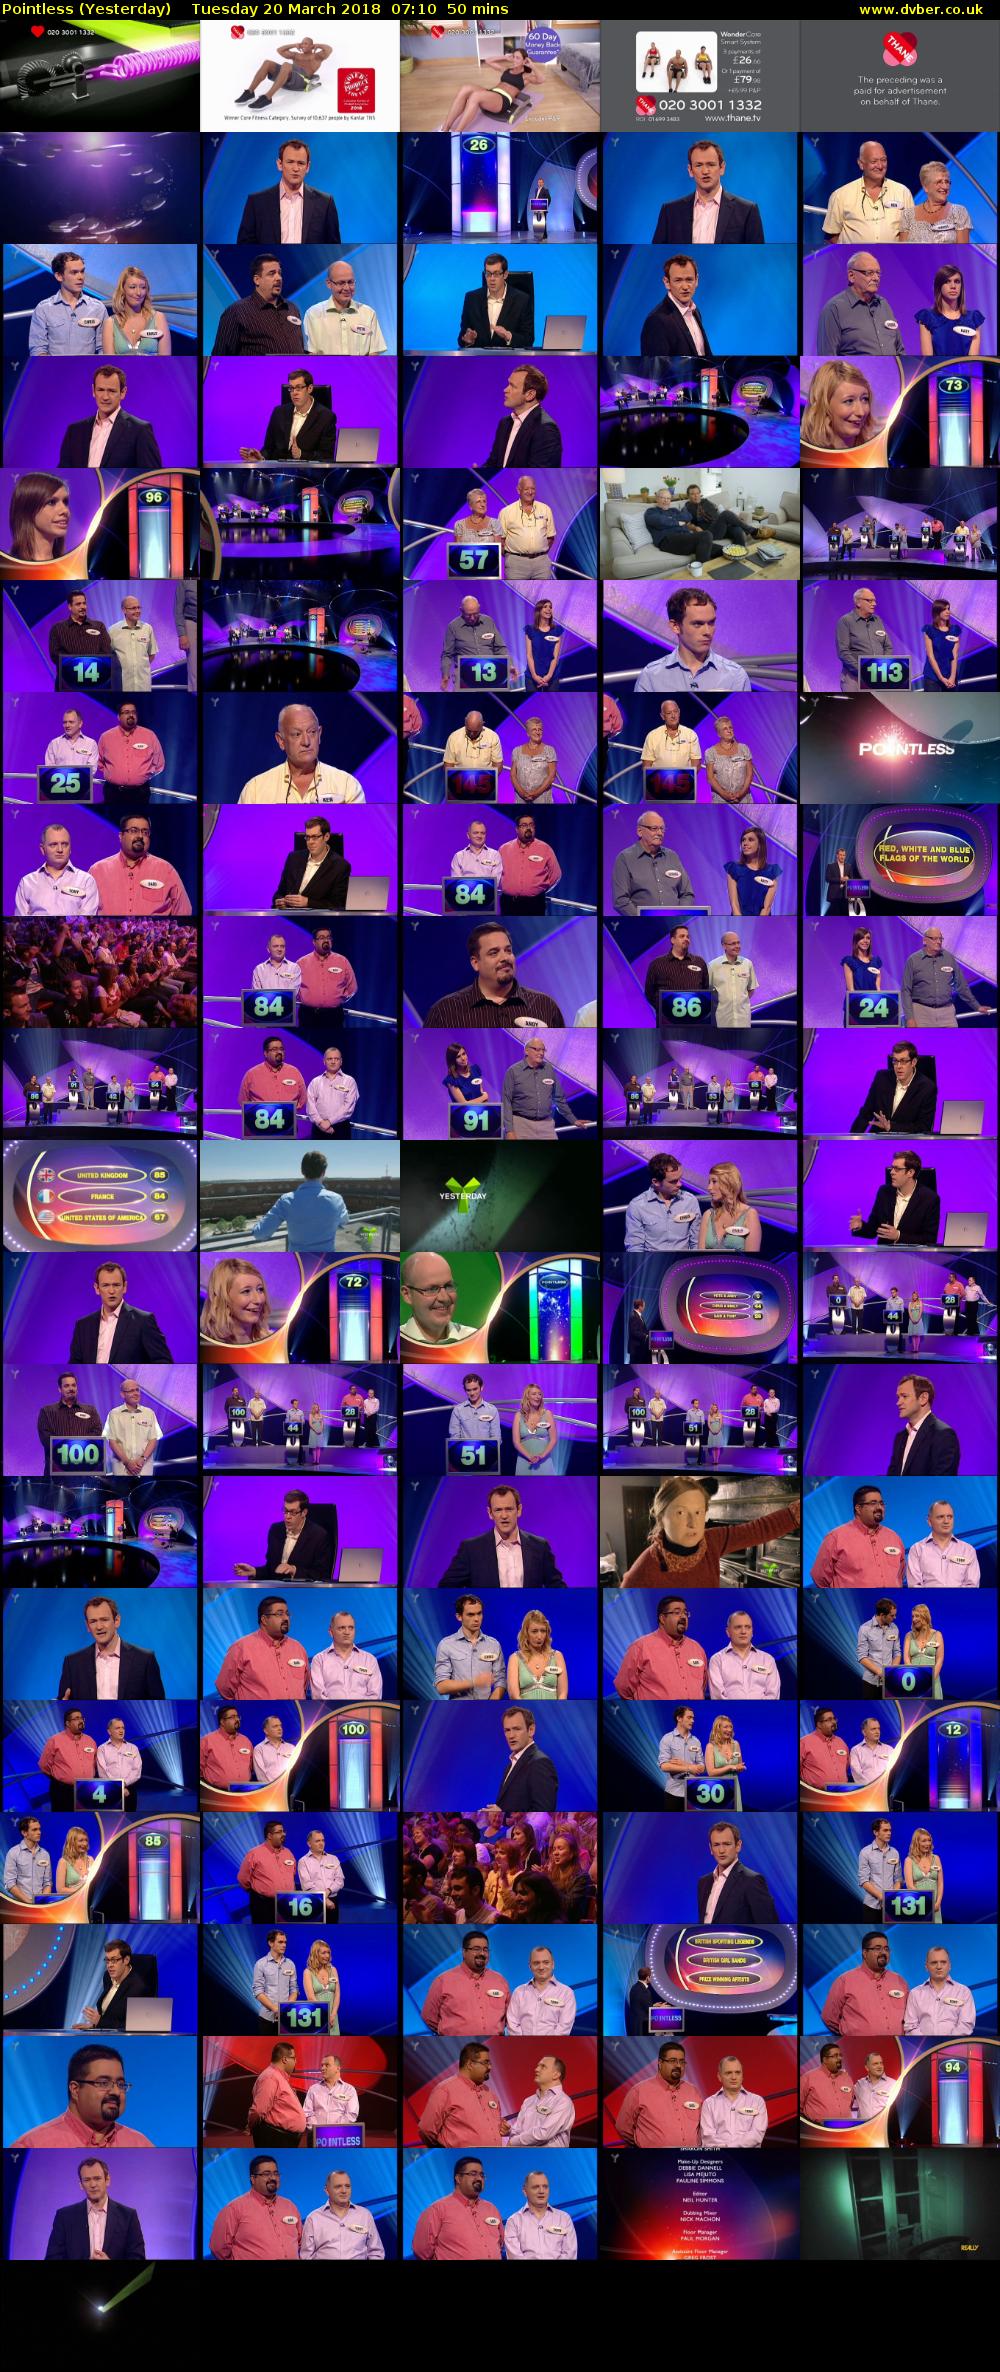 Pointless (Yesterday) Tuesday 20 March 2018 07:10 - 08:00